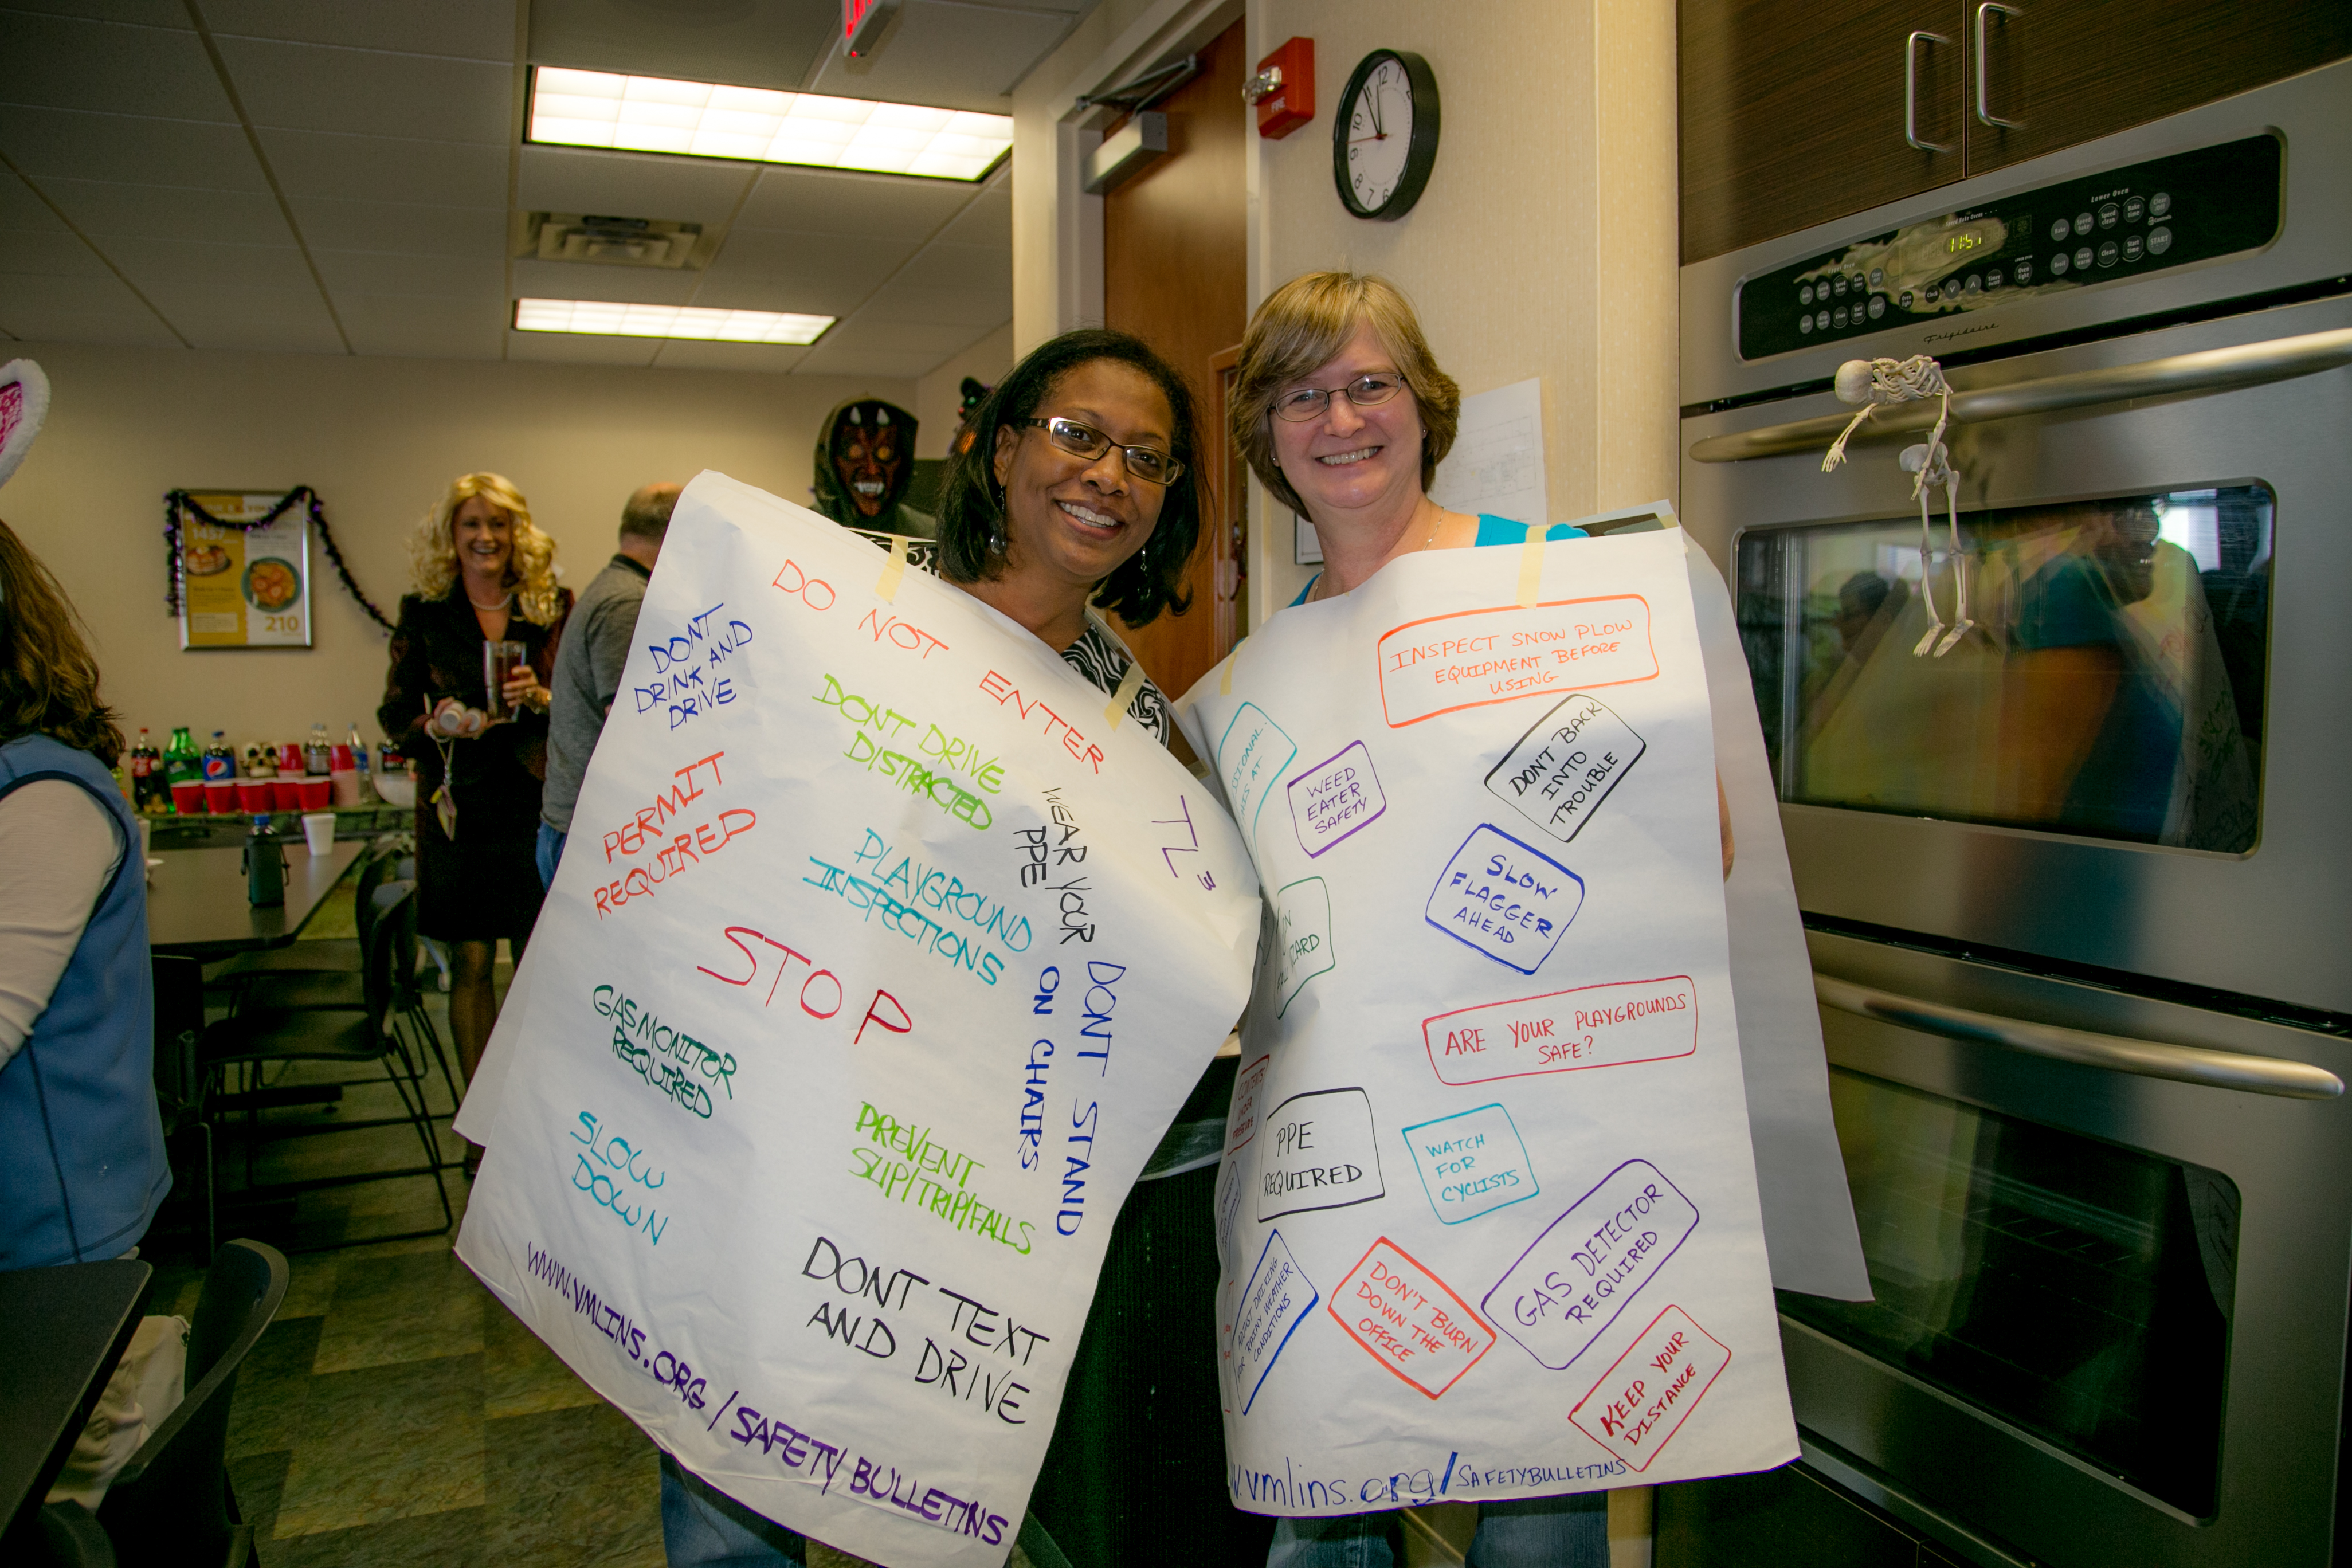 Halloween 2014: Wall and Senior Safety Consultant Fonda Craig dressed as "Safety Bulletins"